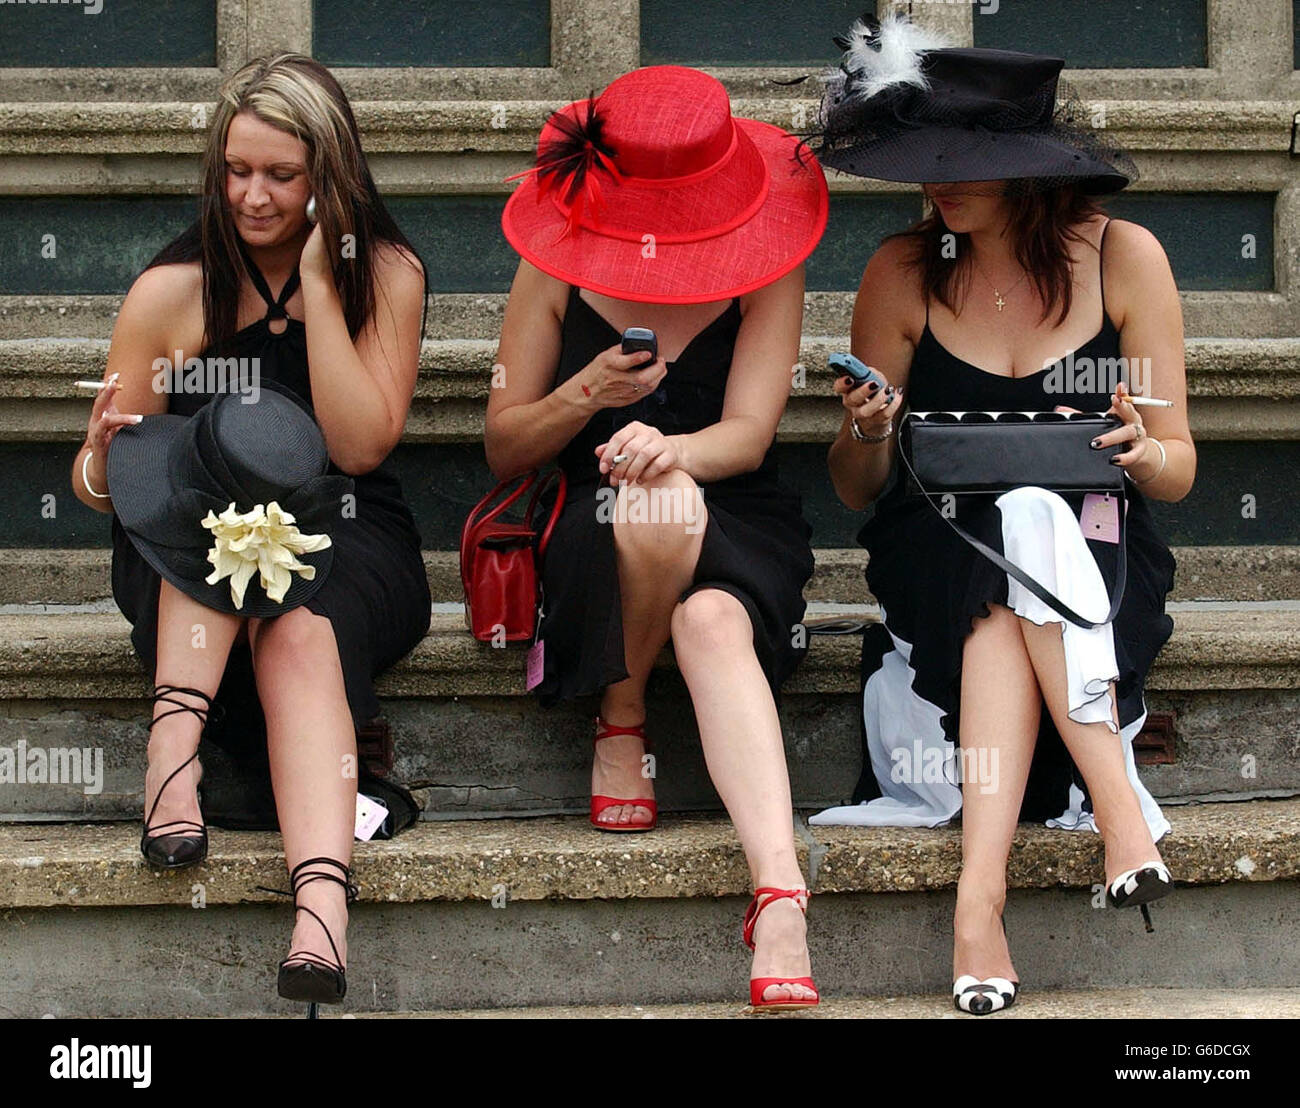 Racegoers at Newmarket Races. Racegoers at Newmarket appear to be more interested in phoning than racing. Stock Photo